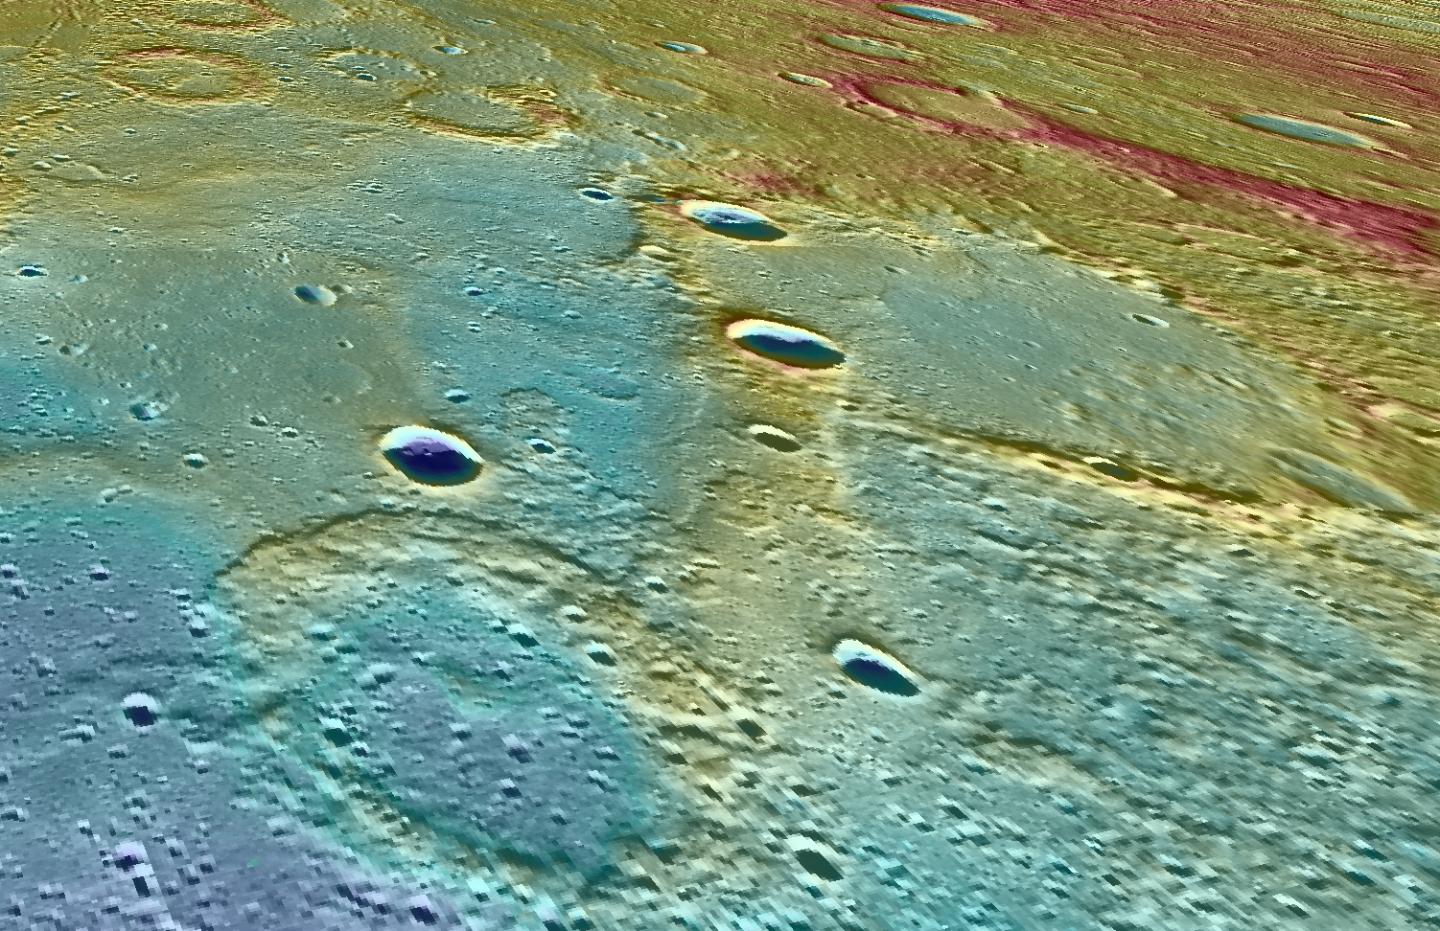 Mercury's Core Dynamo Present Early in Planet's History (1 of 3)